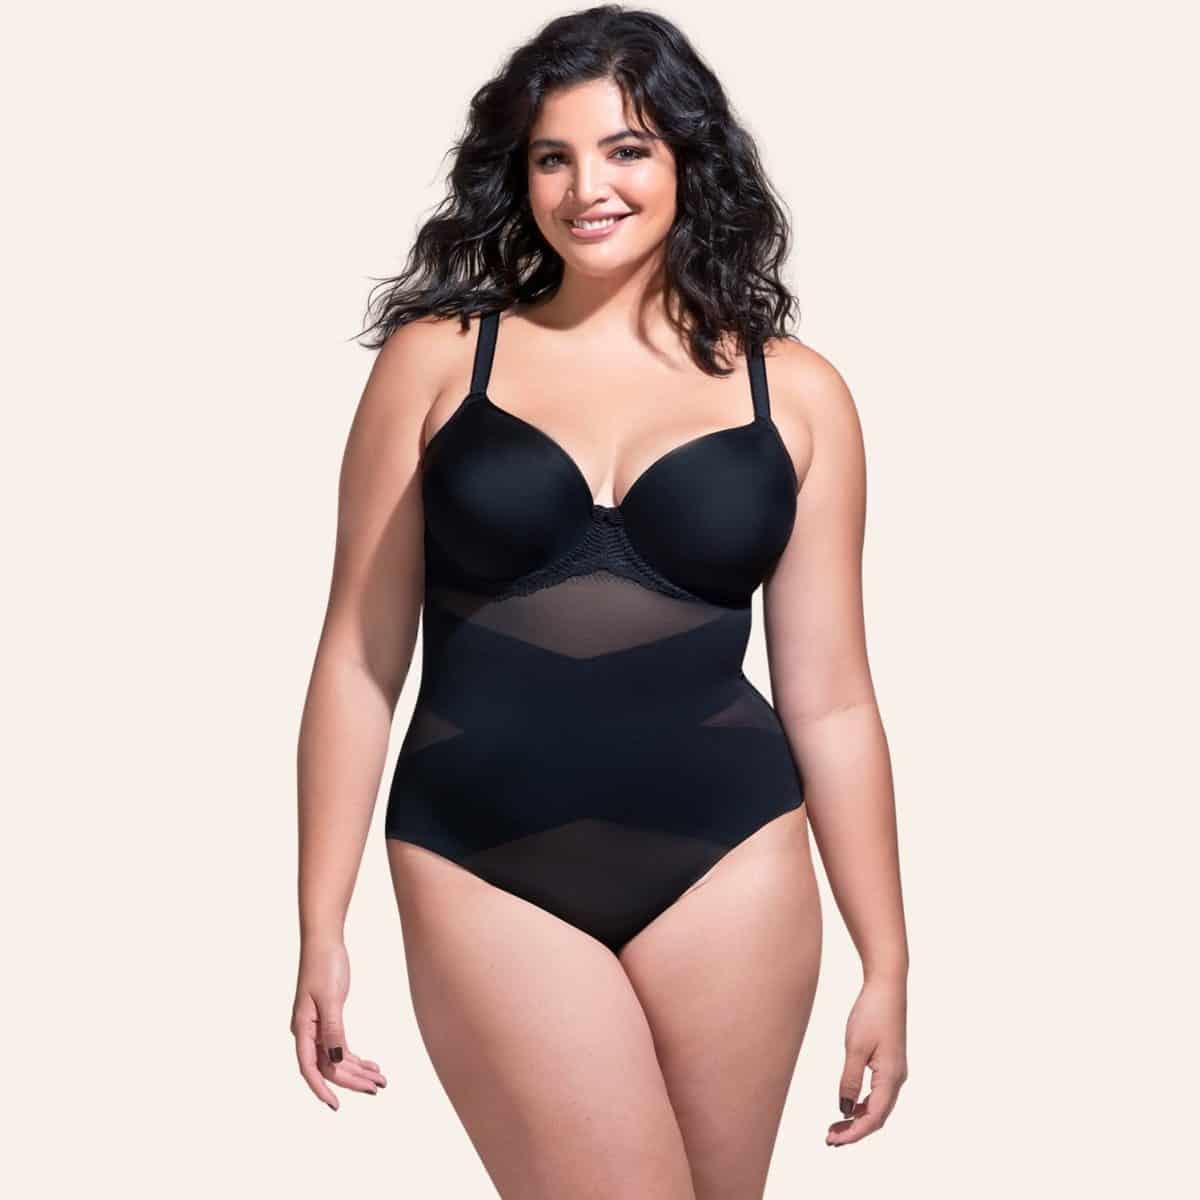 I Tried HoneyLove Shapewear Read This Review Before Buying